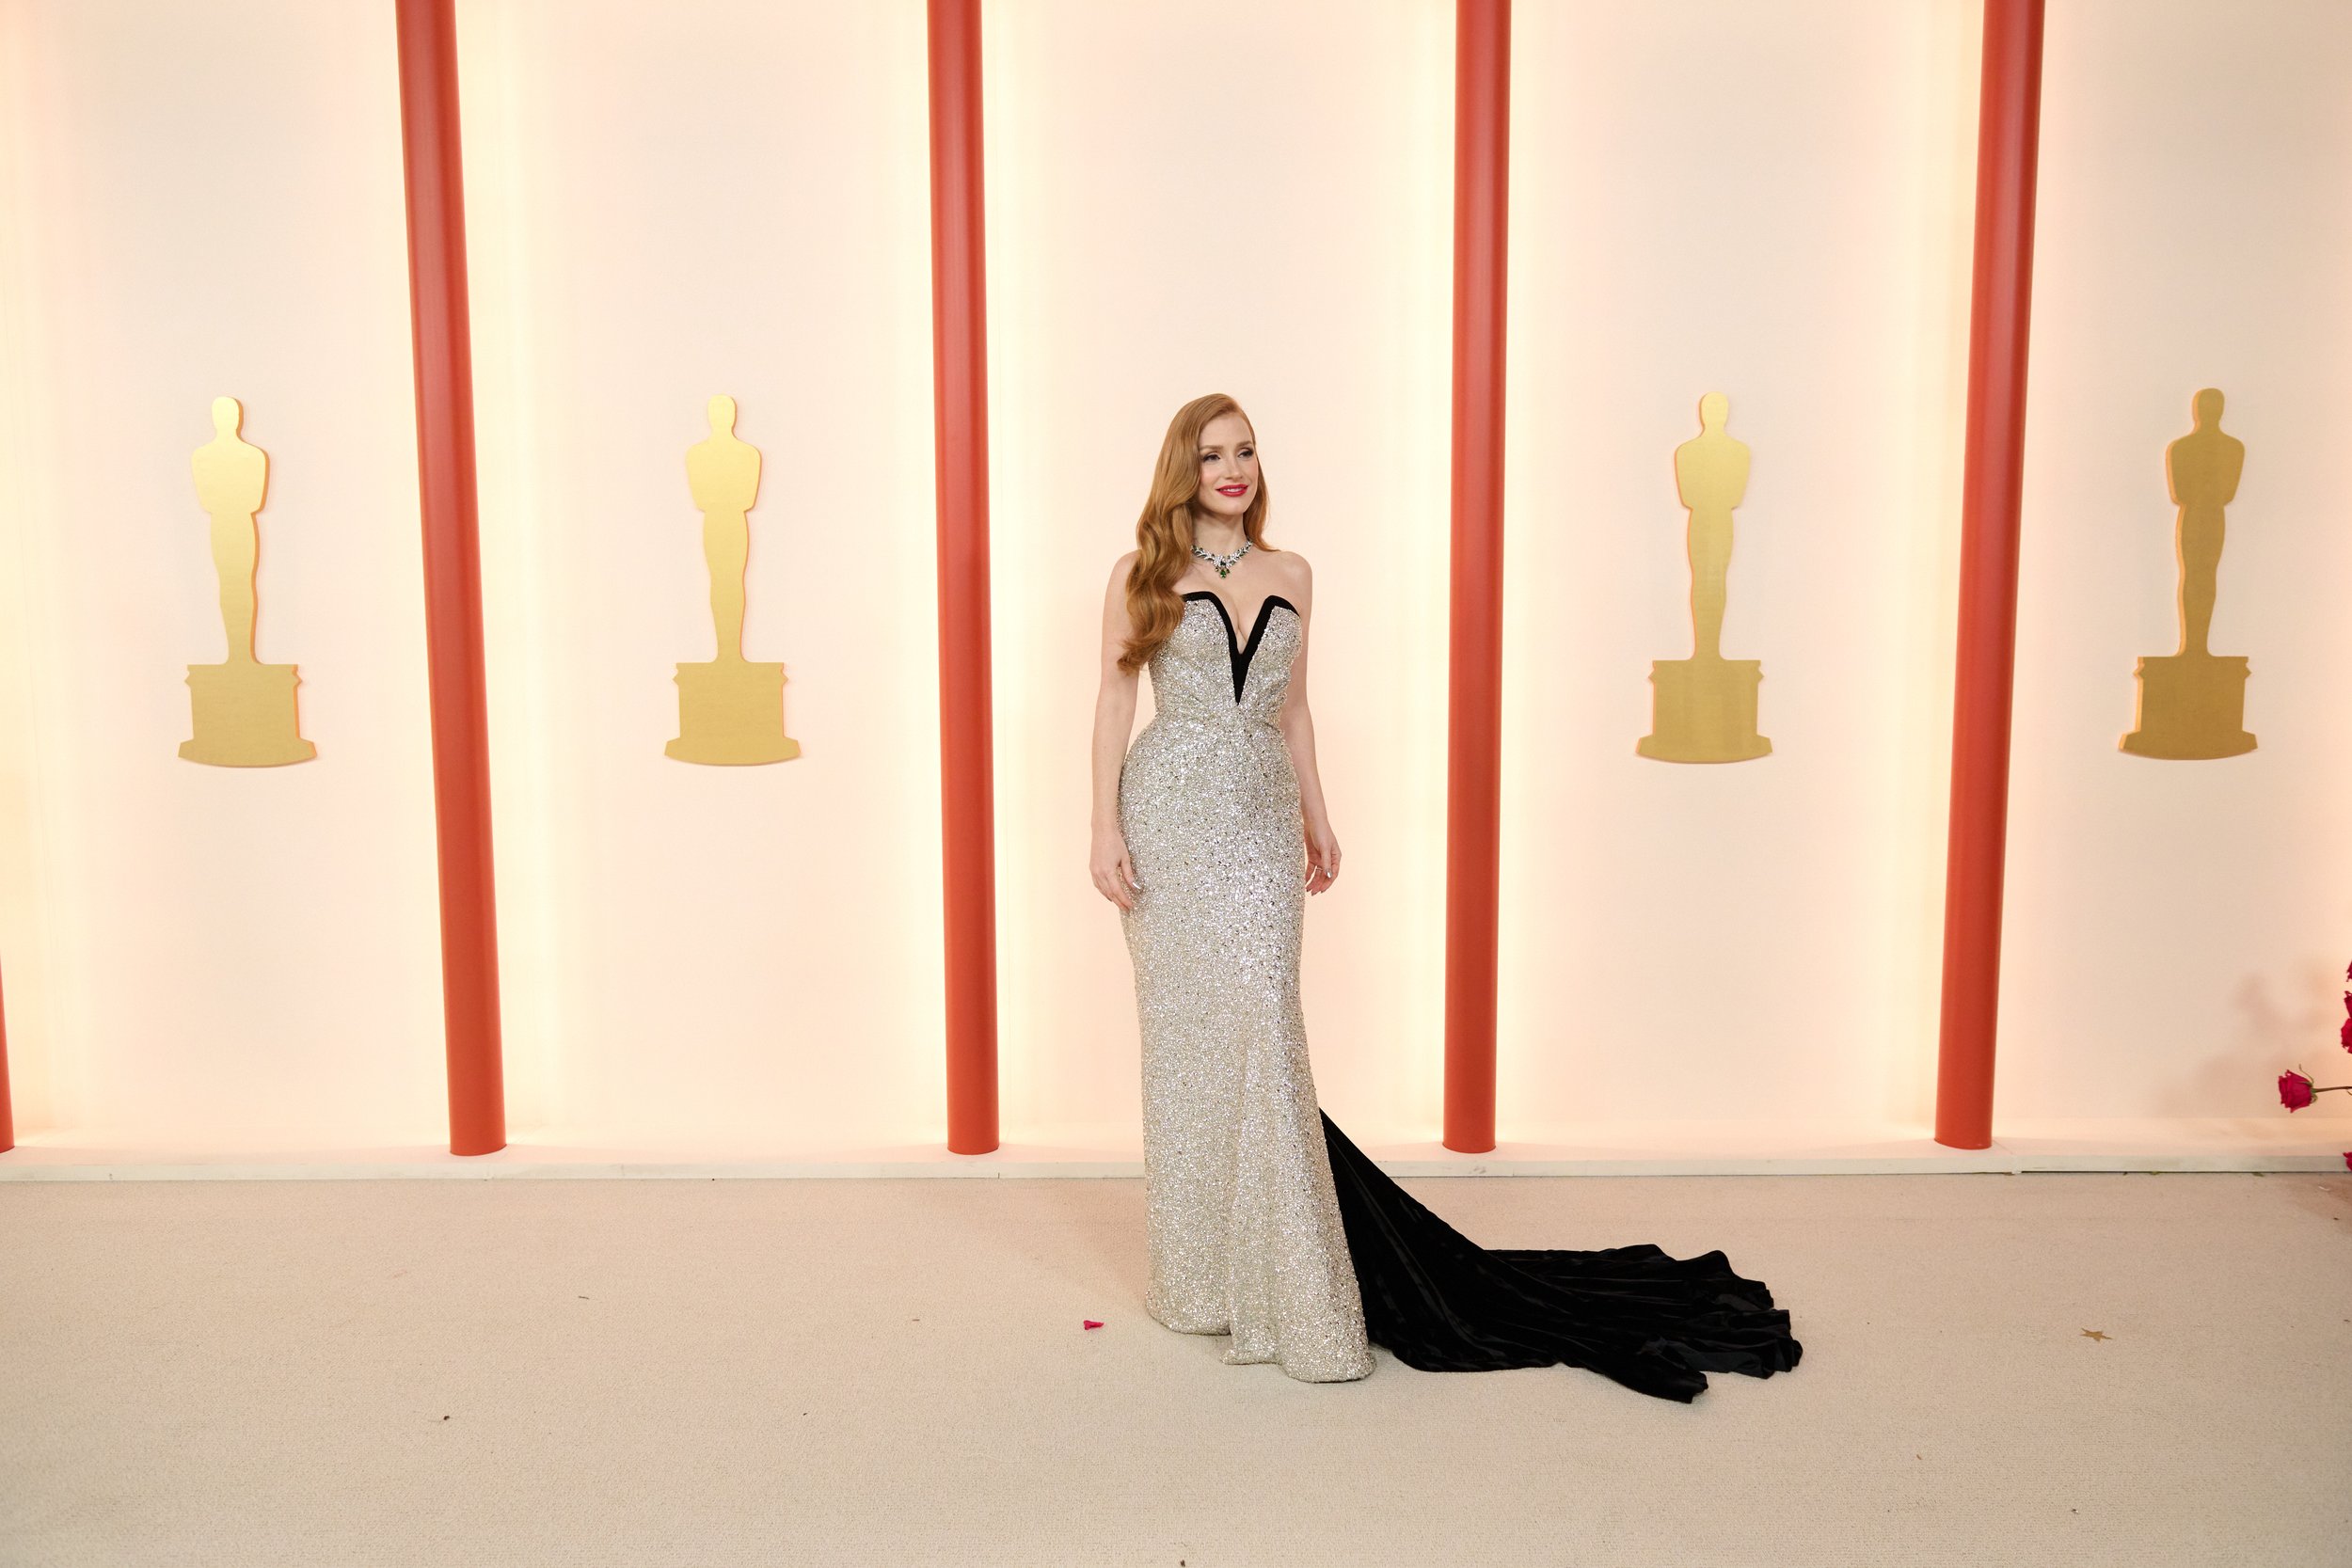 Jessica Chastain arrives on the red carpet of the 95th Oscars® at the Dolby